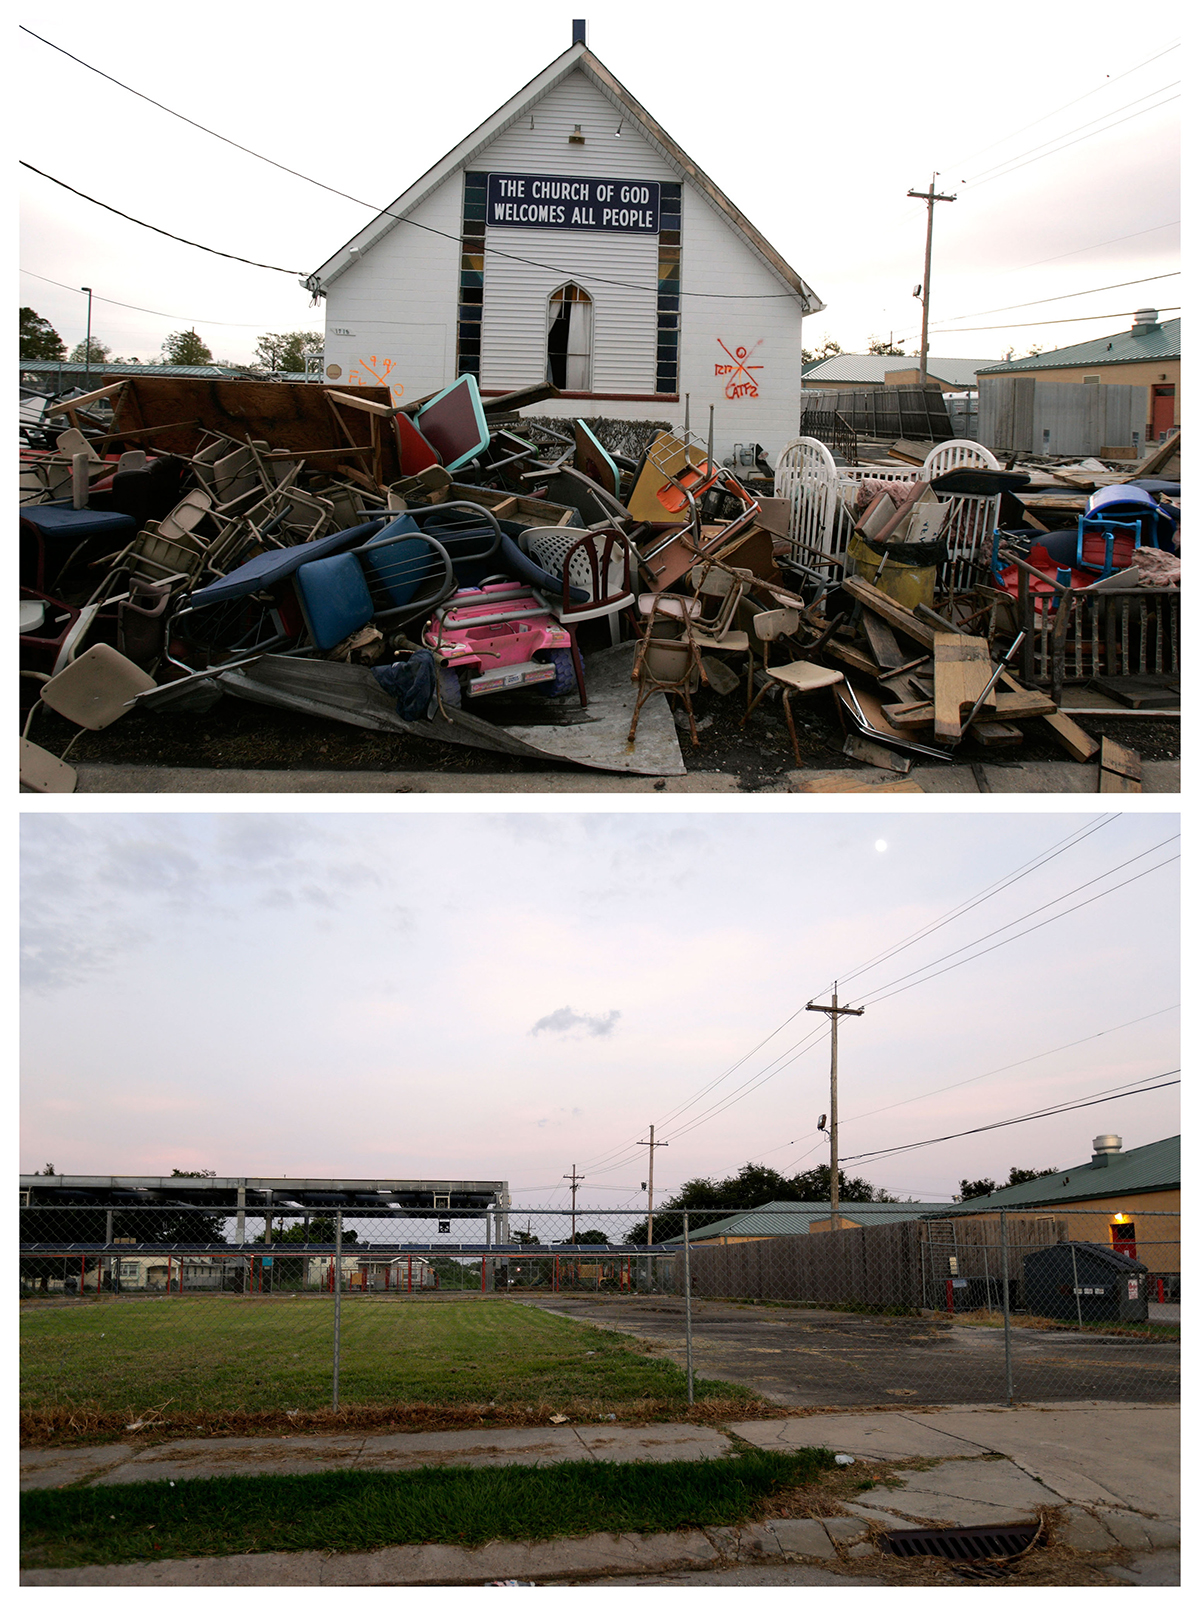 This combination of Dec. 16, 2005, and July 28, 2015, photos shows debris in front of the Church of God damaged by Hurricane Katrina in the Lower Ninth Ward neighborhood of New Orleans, and a decade later, an empty lot where it once stood. Before Katrina, the Lower Ninth Ward was a working-class and predominantly African-American neighborhood just outside the city's historic center. (Jacqueline Larma, Gerald Herbert / Associated Press)